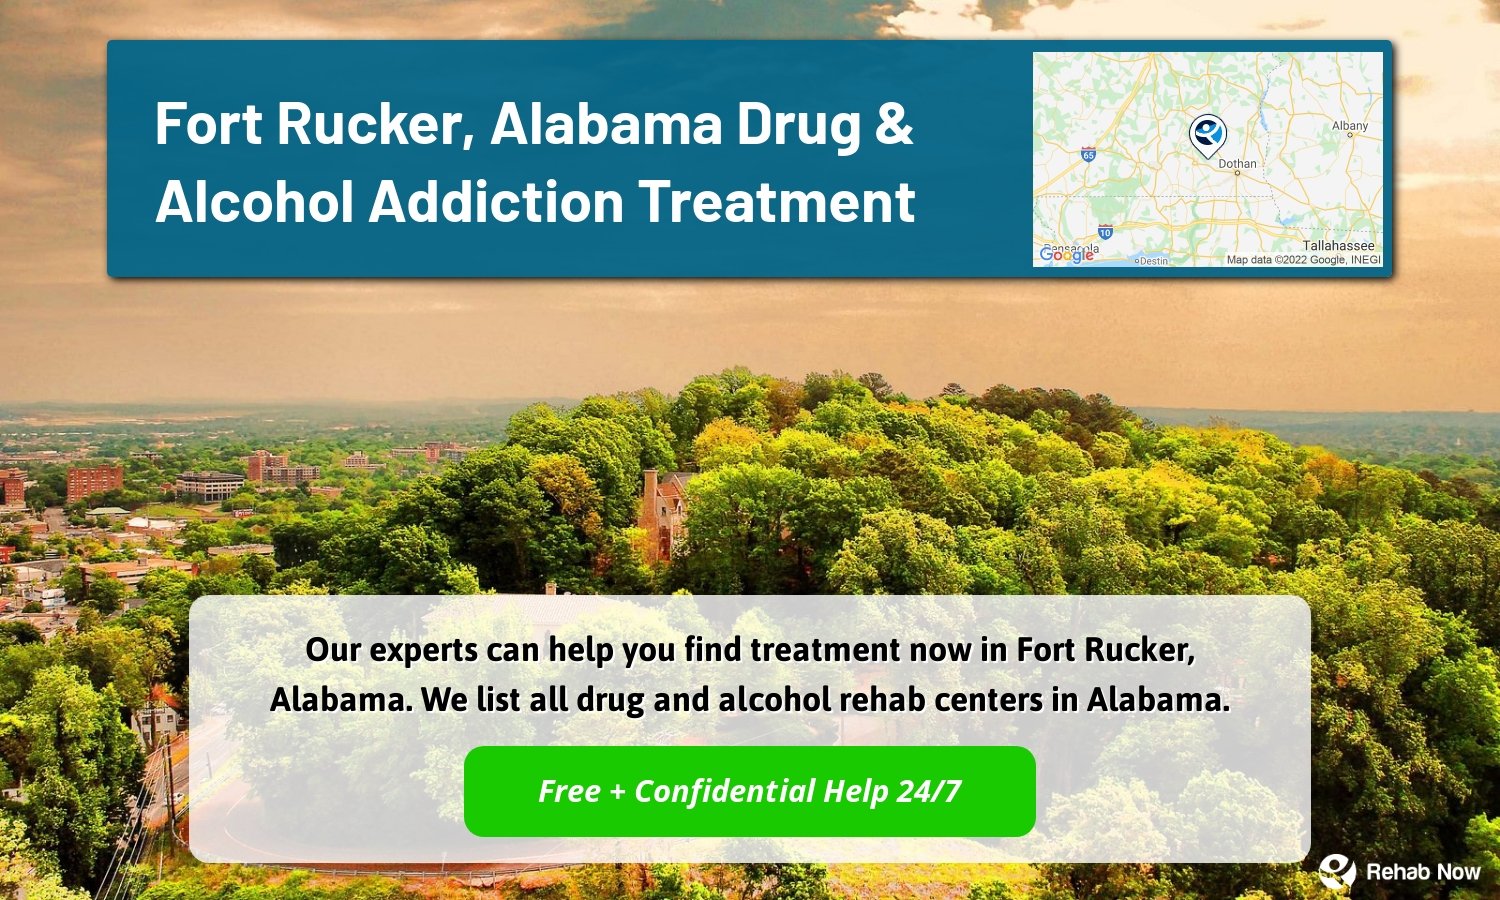 Our experts can help you find treatment now in Fort Rucker, Alabama. We list all drug and alcohol rehab centers in Alabama.